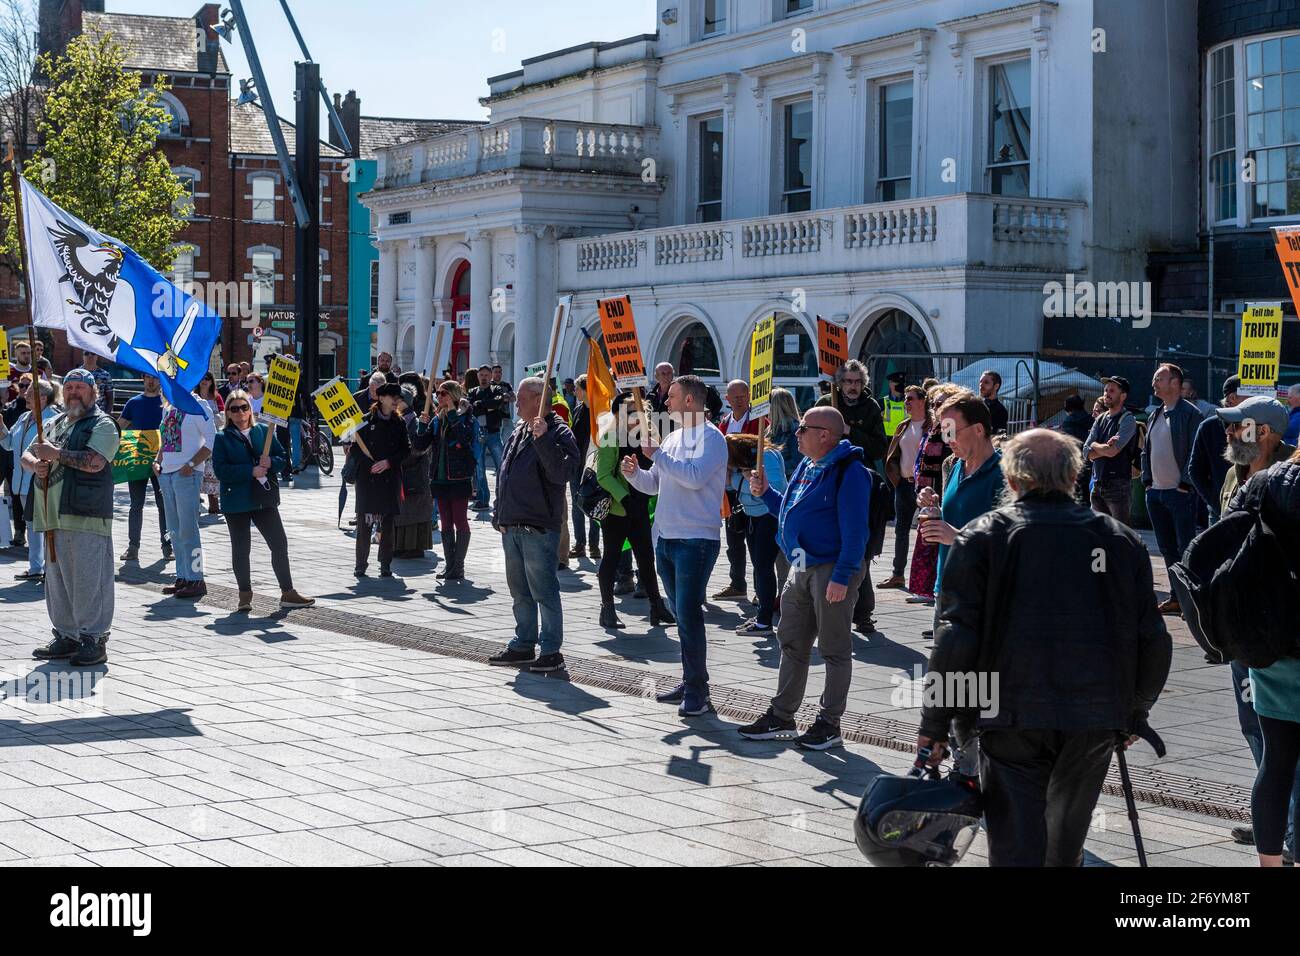 Cork, Ireland. 3rd Apr, 2021. An 'End the Lockdown' protest tokk place in Cork today, the second such event in the space of a month. Approximately 300 people attended in the midst of a heavy Garda presence. The protesters assembled on Grand Parade. Credit: AG News/Alamy Live News Stock Photo